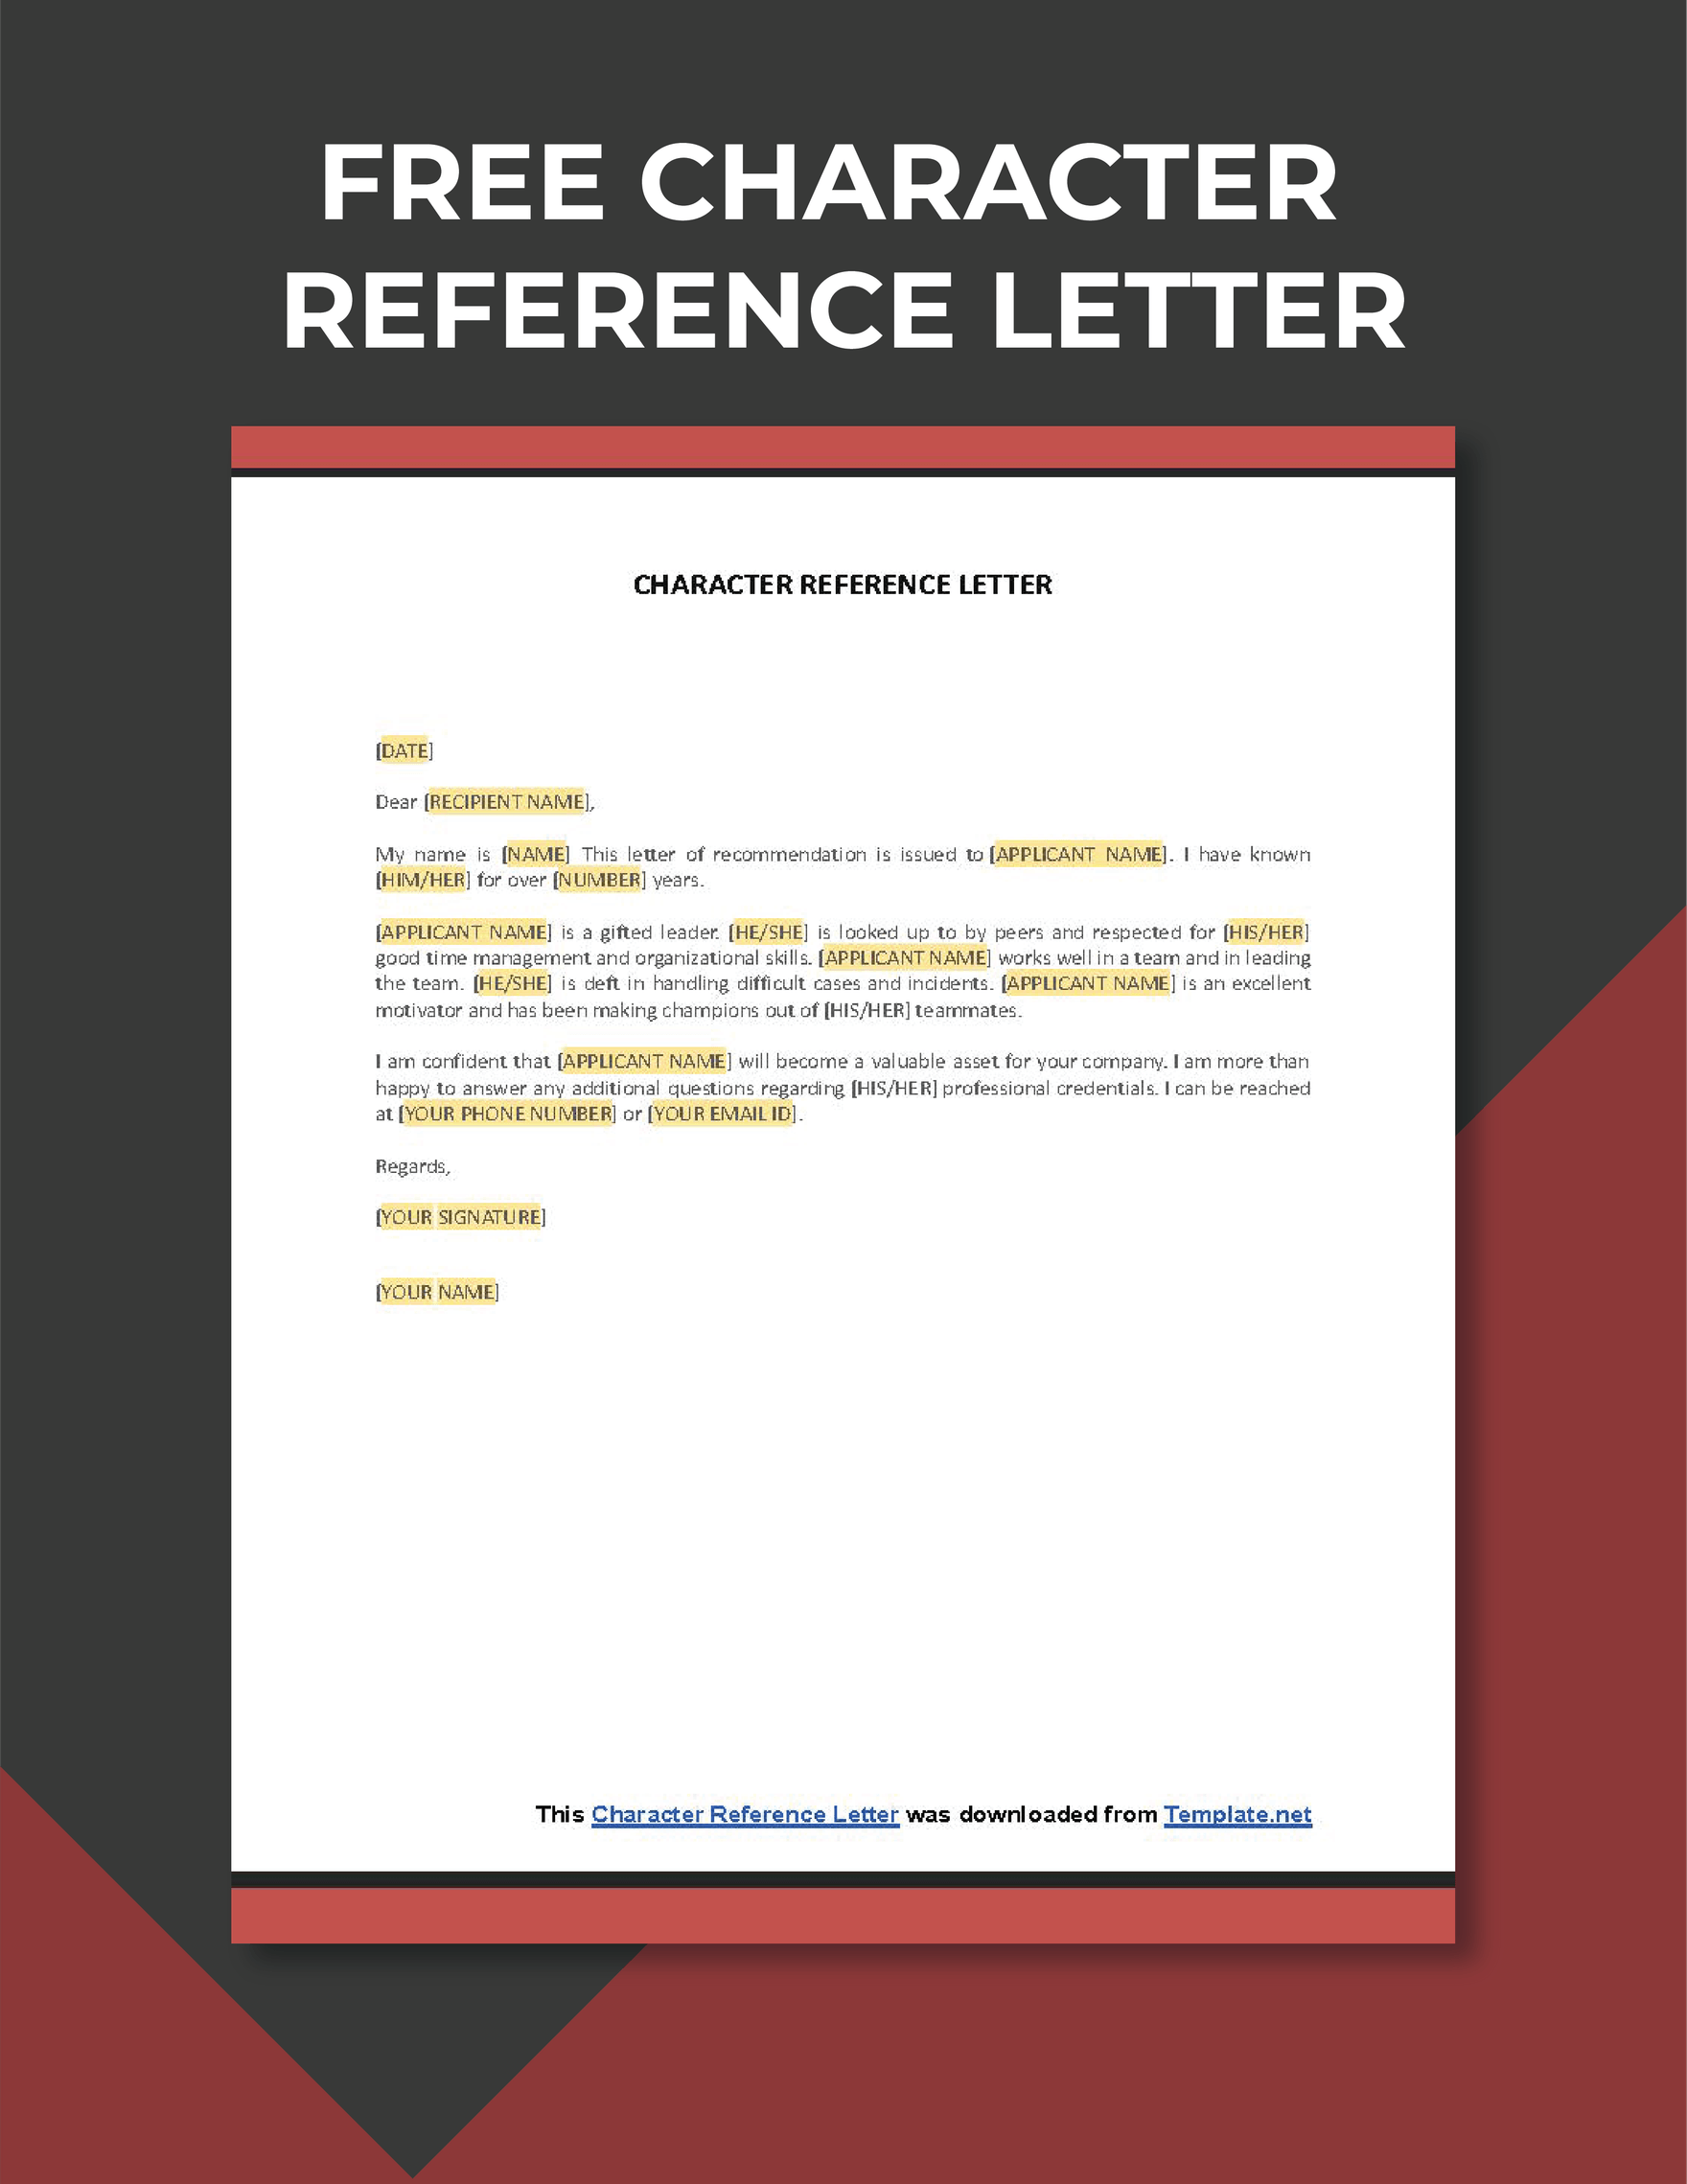 Free Character Reference Letter Template Google Docs Word Outlook Apple Pages PDF 